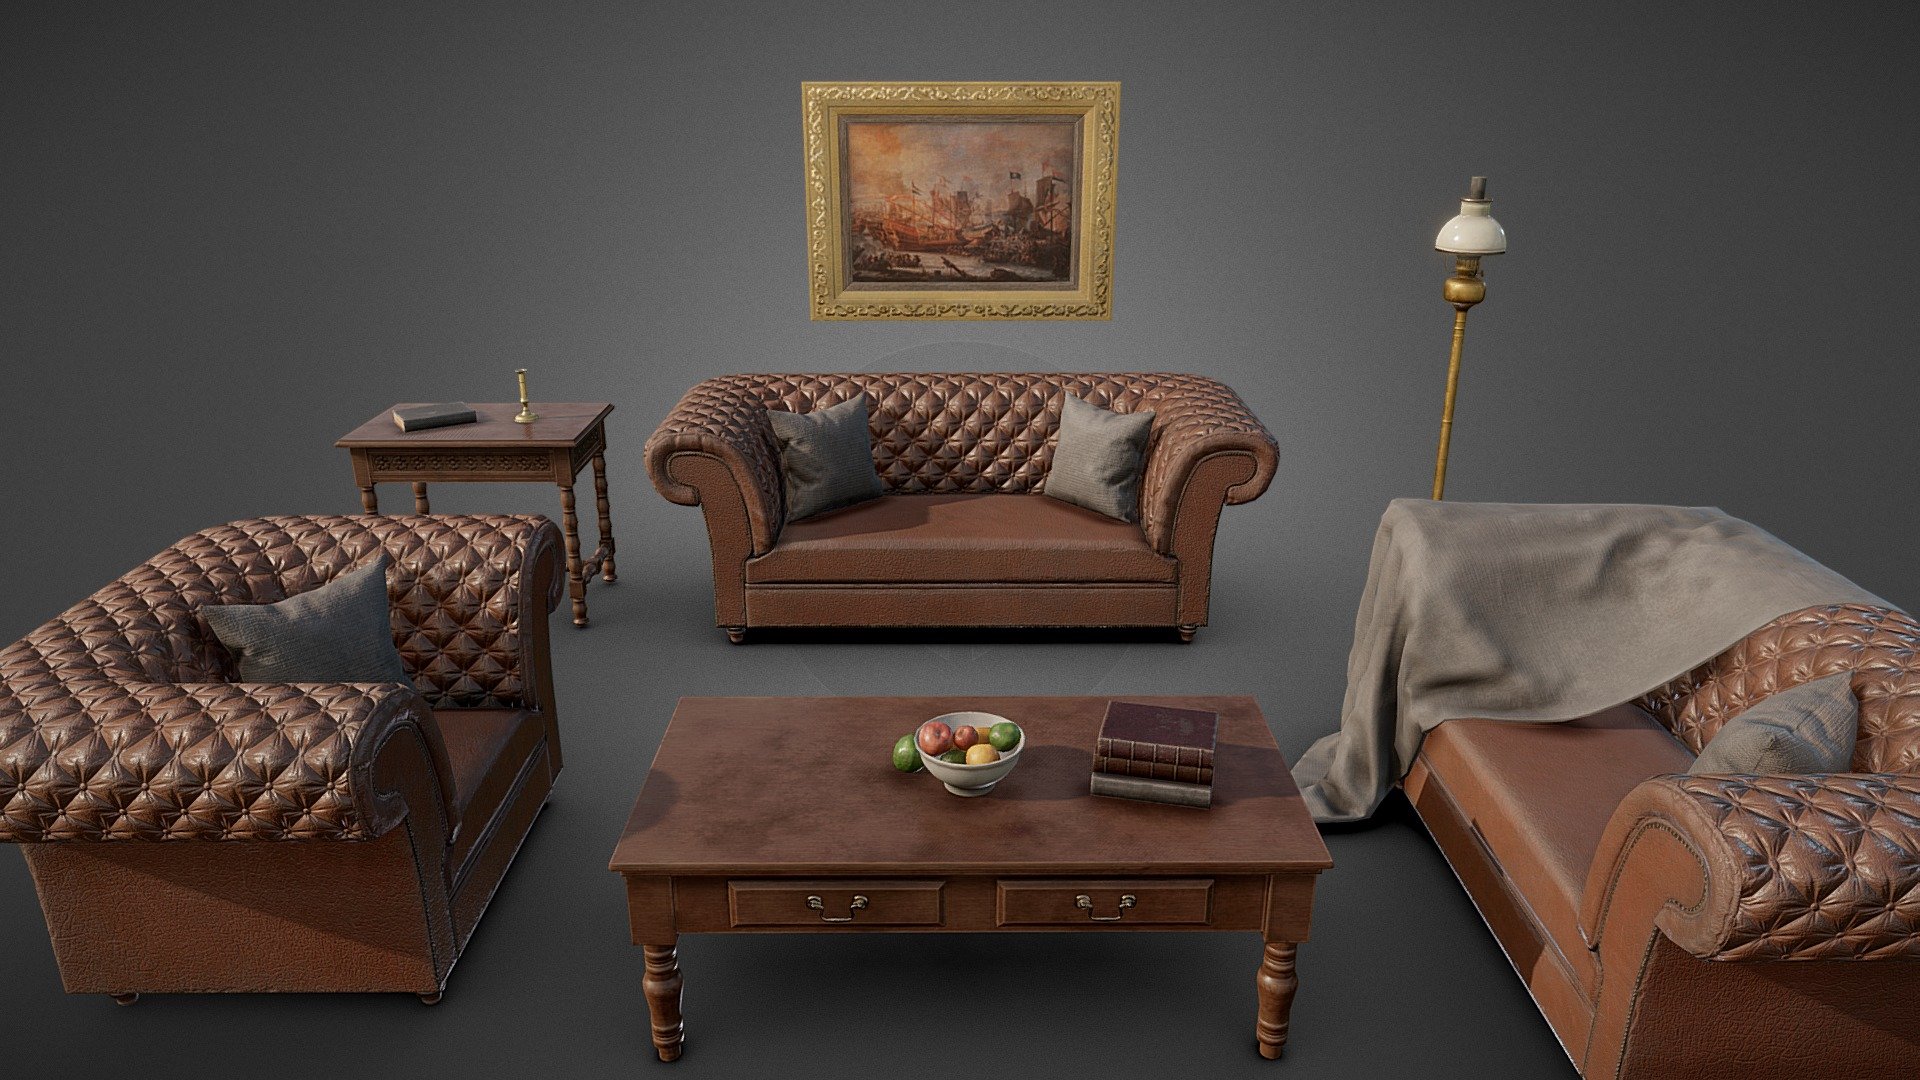 A low-poly, game ready Victorian sofa set with a props. These models will look great in an old, Victorian-era environment and are suitable for use in game, VR, archviz and visual production.

Features




Model includes victorian inspired sofa set (3 sizes), cushions and blanket which can be moved / removed, painting, oil lamp, and coffee table and side table with a fruit bowl, books and candle holder.

Clean topology. Objects are grouped, named appropriately and unwrapped with no overlaps

Modelled in Blender and textured in Substance Painter.

30,849 tiangle count

Additional file includes the Blender project with high-poly meshes

Textures




This model uses the metalness PBR workflow and includes 6 texture sets at 4096x4096 (1 set), 2048x2048 (1), and 1024x1024 (4). 

Textures include Base Colour, Roughness, Normal, and Metallic.
 - Victorian Sofa Set - Buy Royalty Free 3D model by Matthew Collings (@mtcollings) 3d model